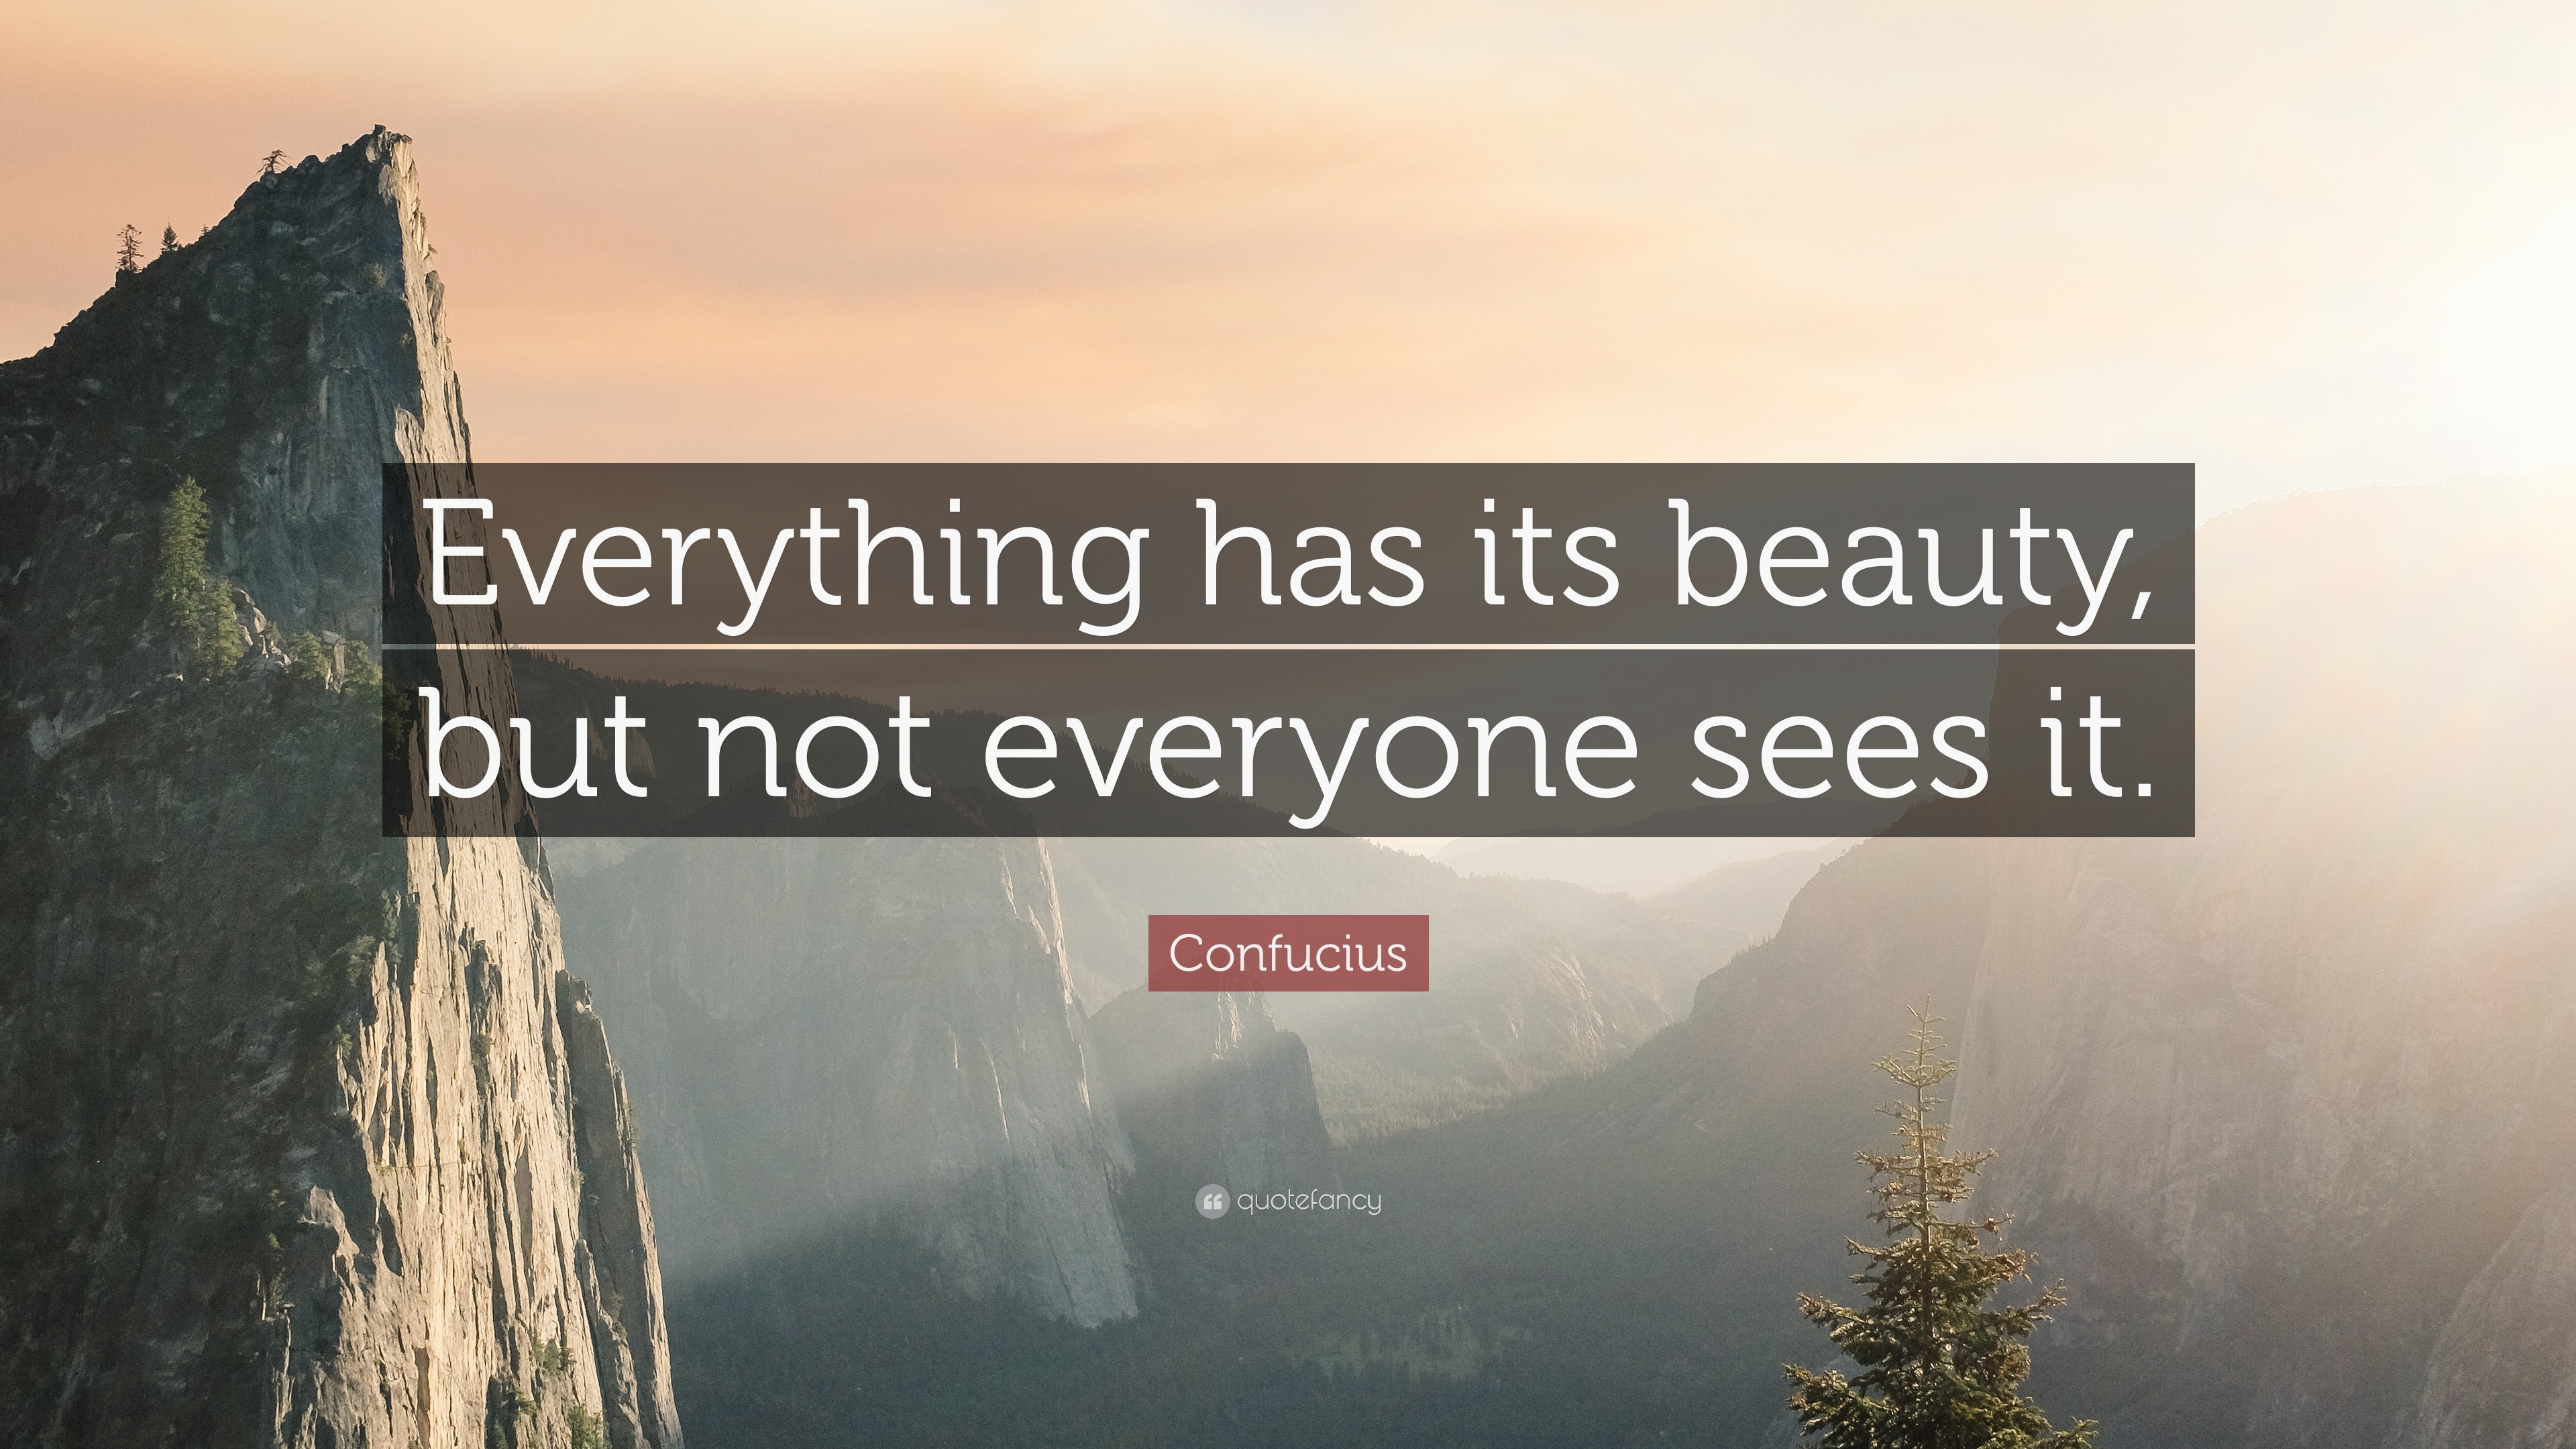 Confucius Quote: “Everything has its beauty, but not everyone sees it.”